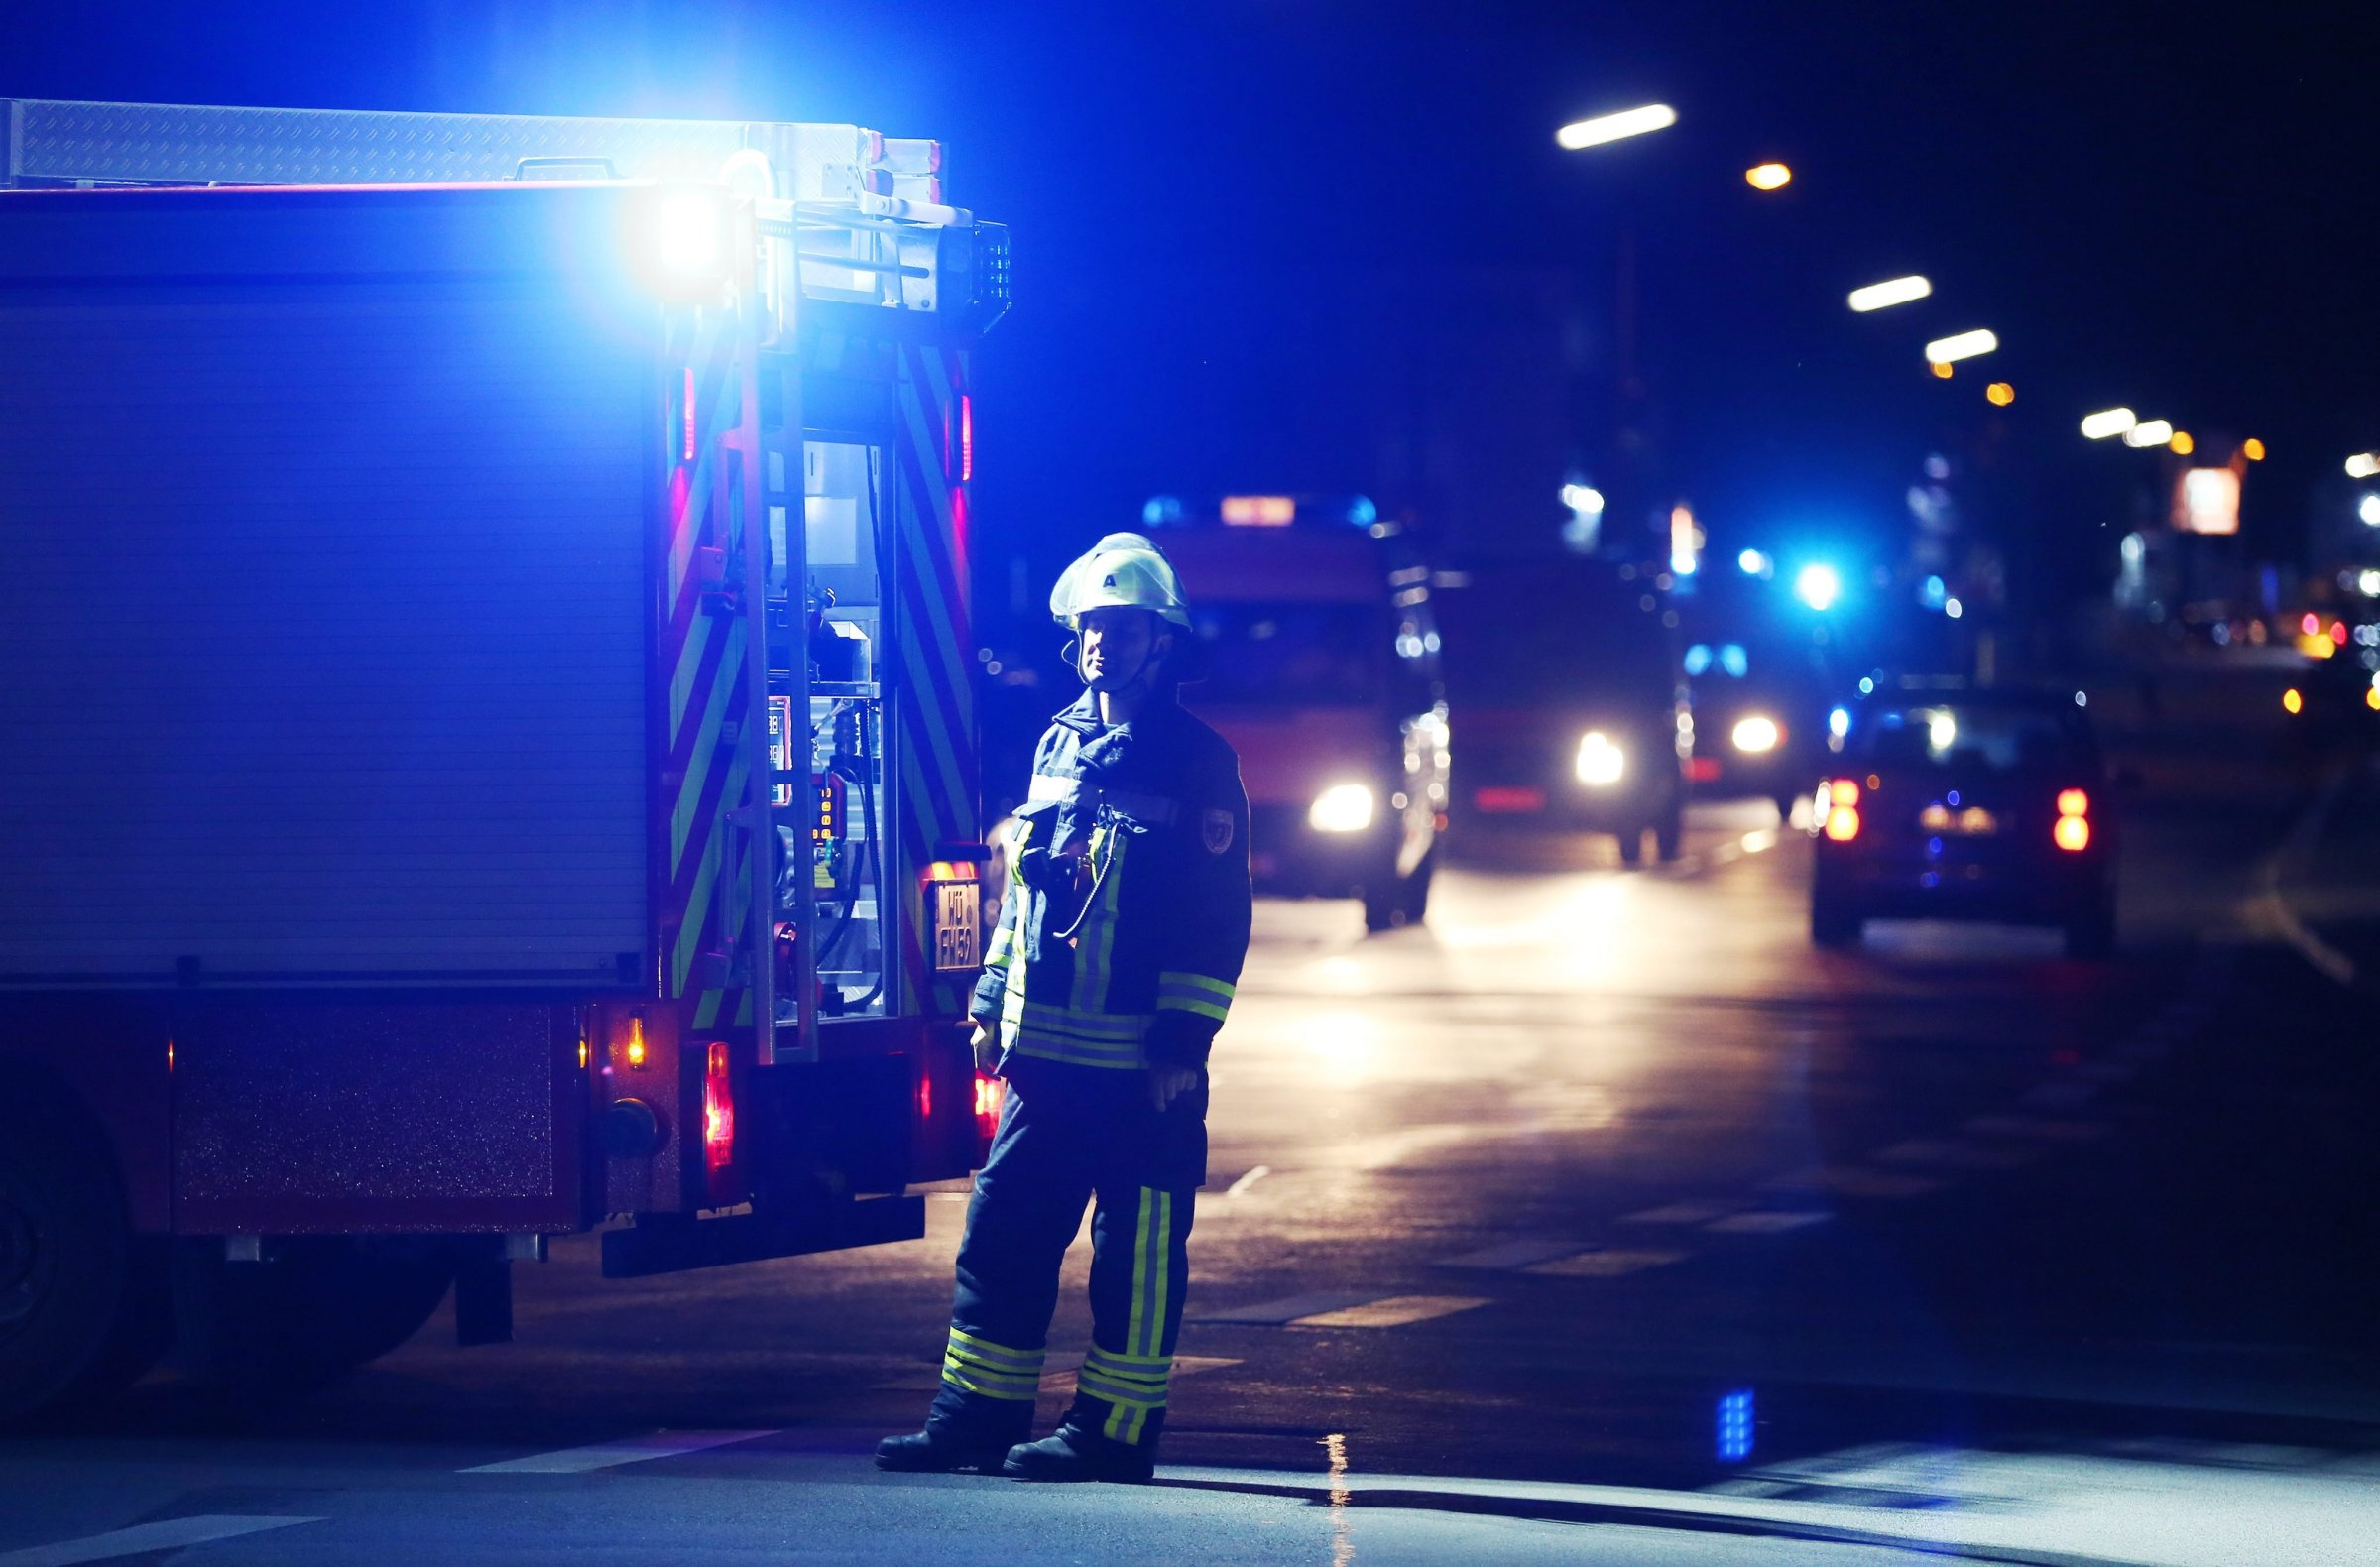 A firefighter stands at a road block in Wuerzburg, Germany, July 18, 2016. Reports state that a man allegedly wielding an axe injured multiple passengers on a regional train in Wuerzburg.